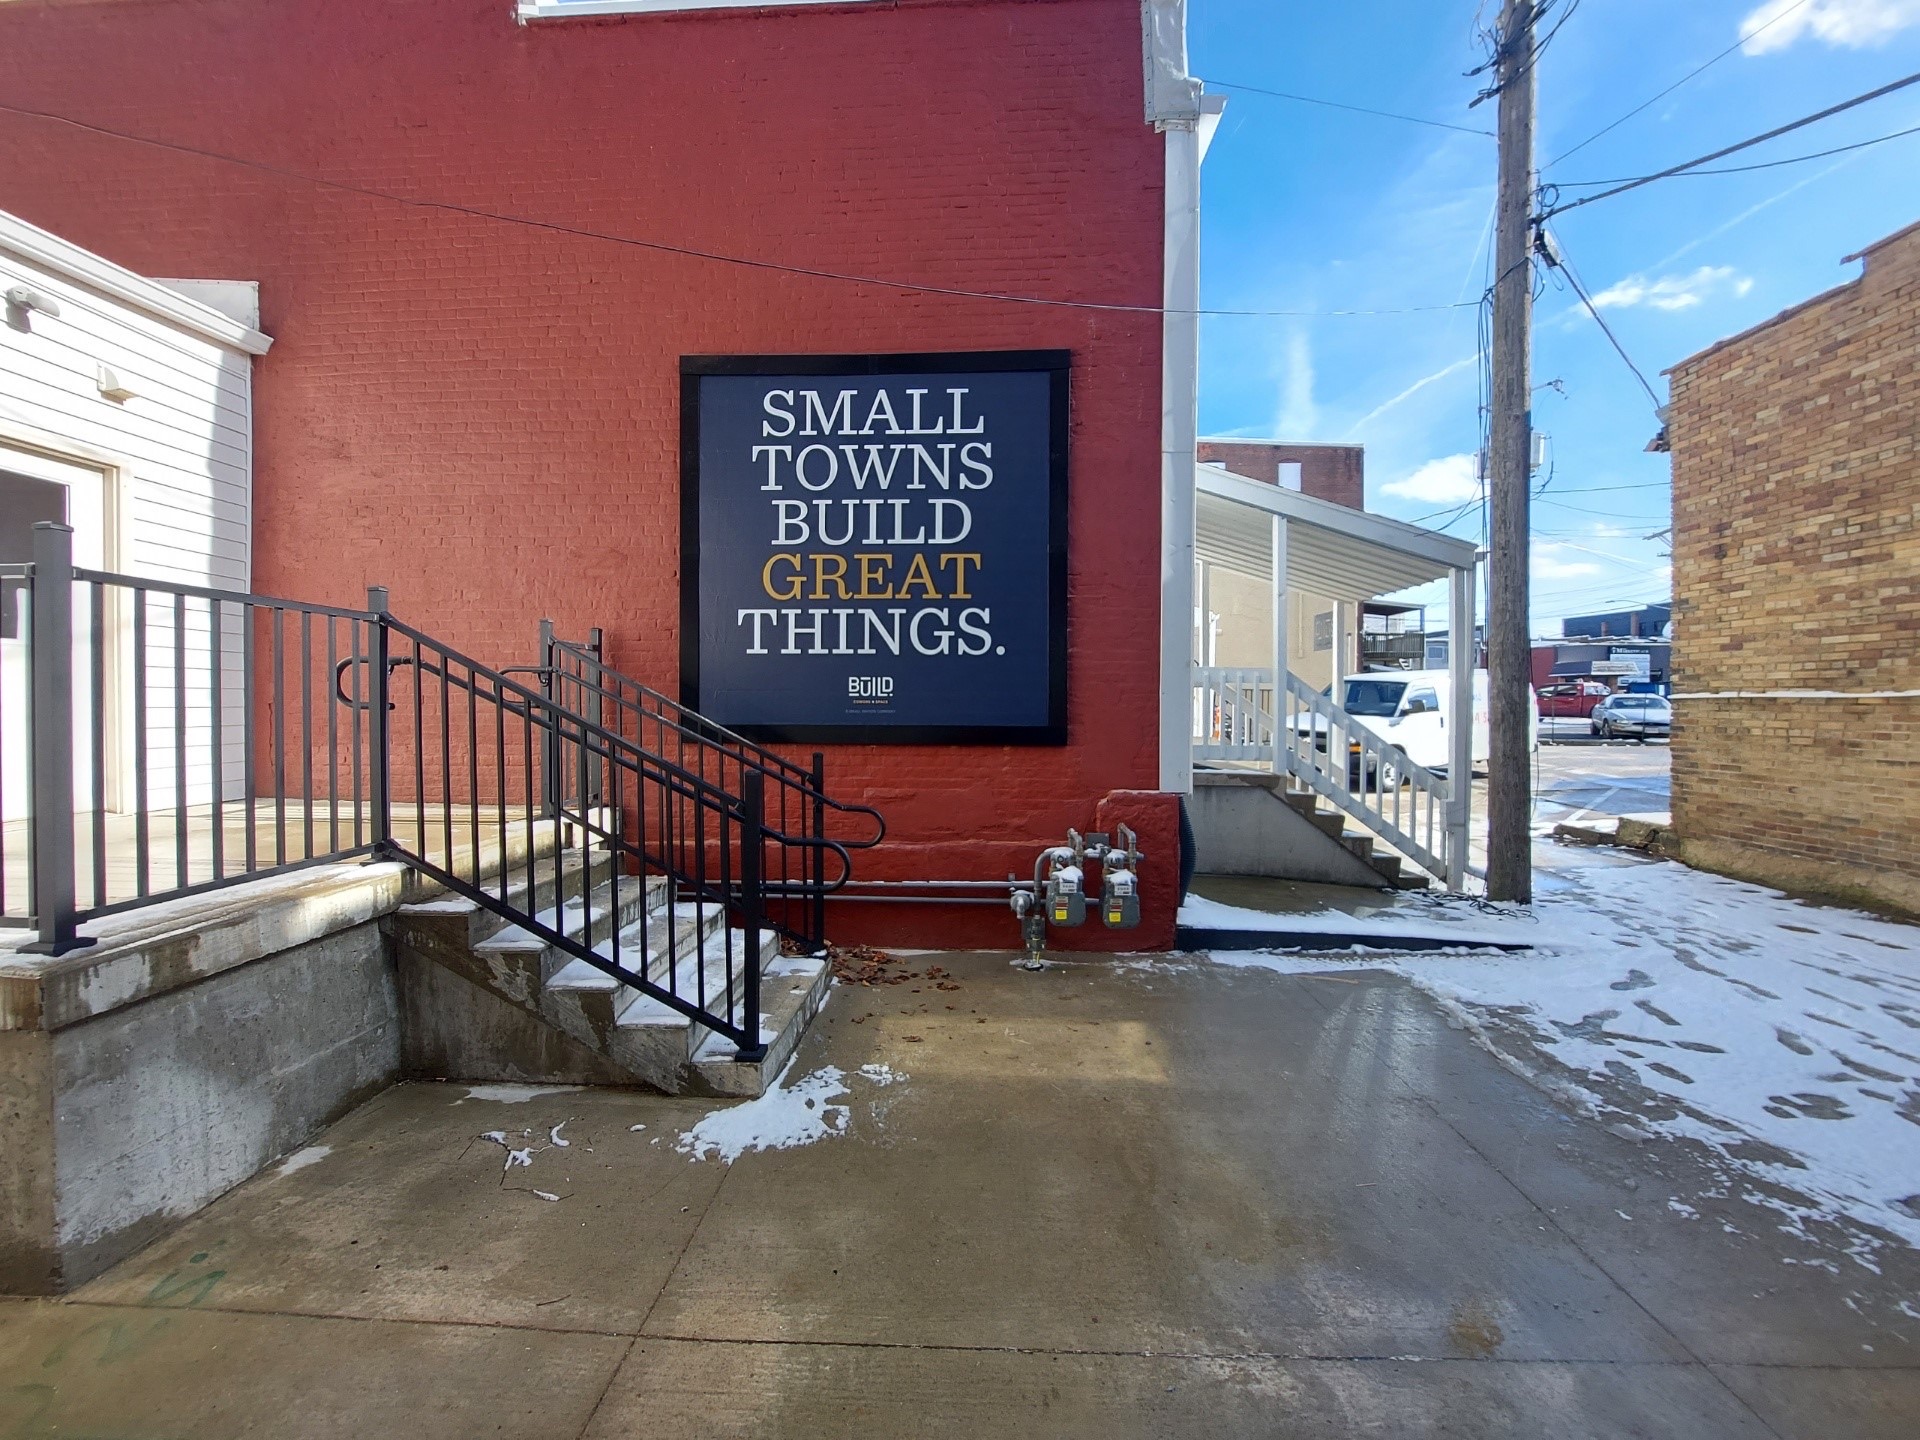 Small-Towns-Build-Great-Things-BannerFrame-Hinge-Lind-SignSpring-Final-futher-back Wallscape Of The Week: Small Towns Build Great Things